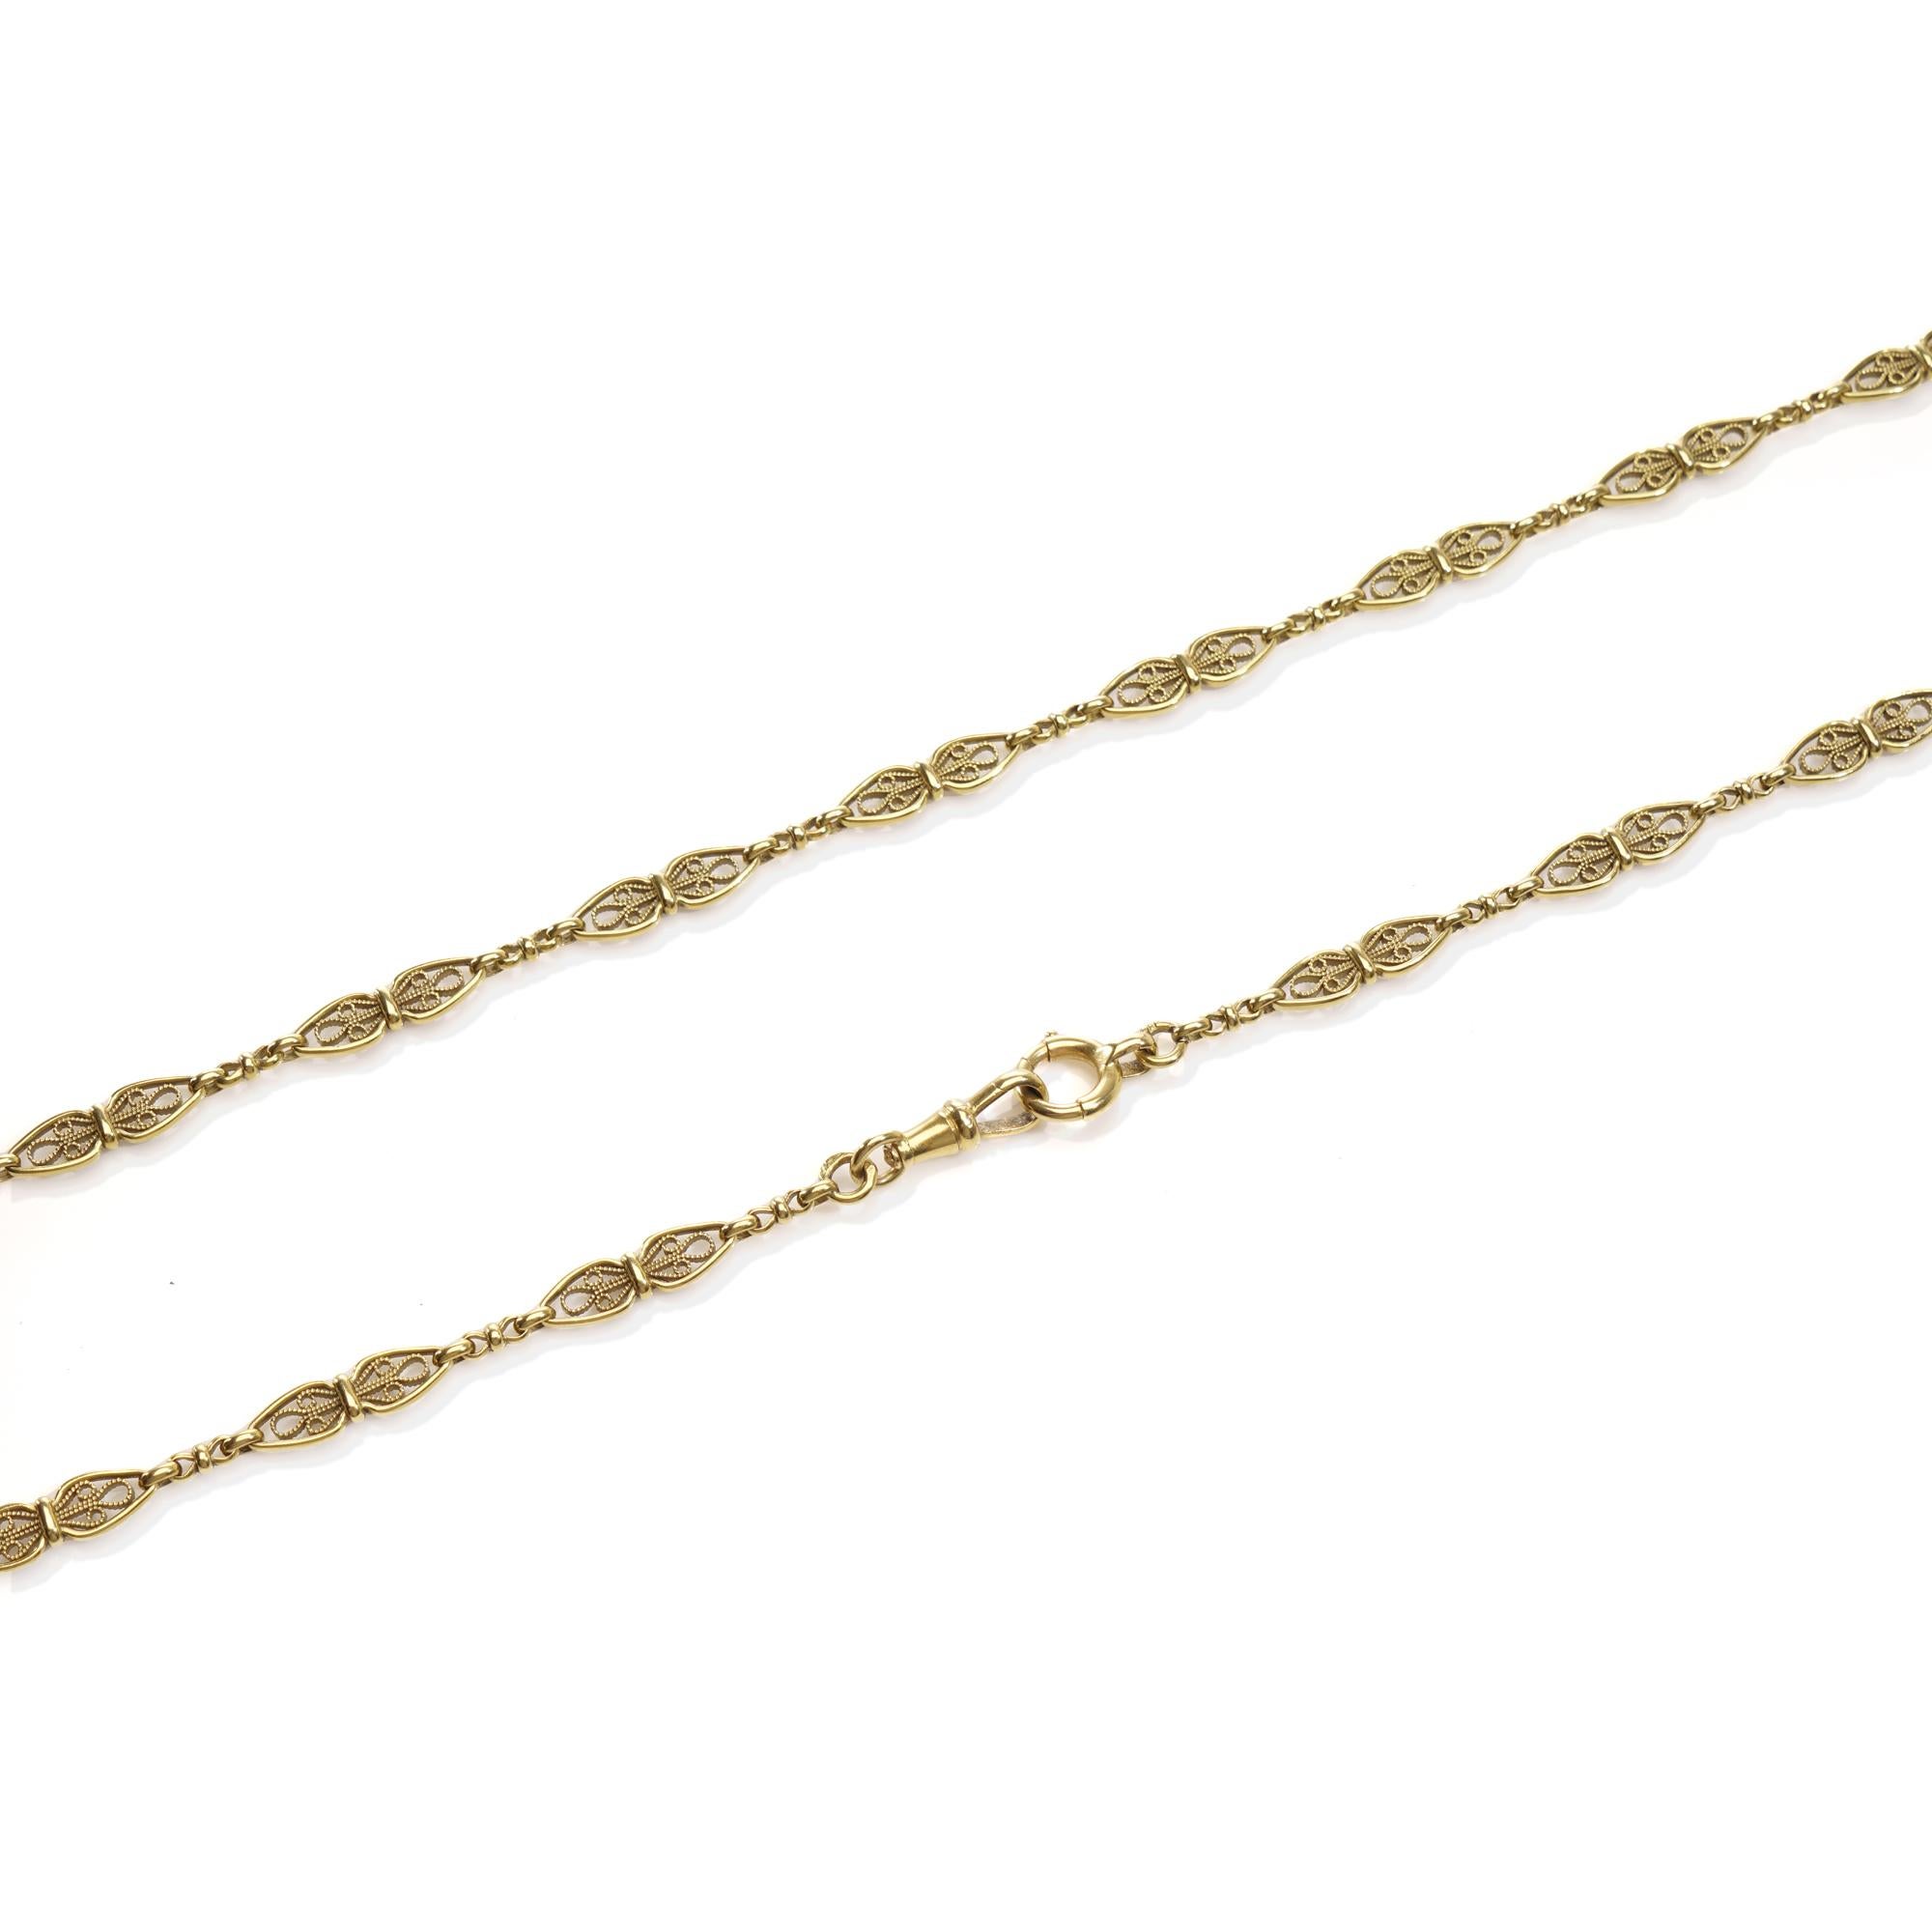 Antique French 18kt Yellow Gold Long Fancy Link Chain Necklace In Excellent Condition For Sale In Braintree, GB